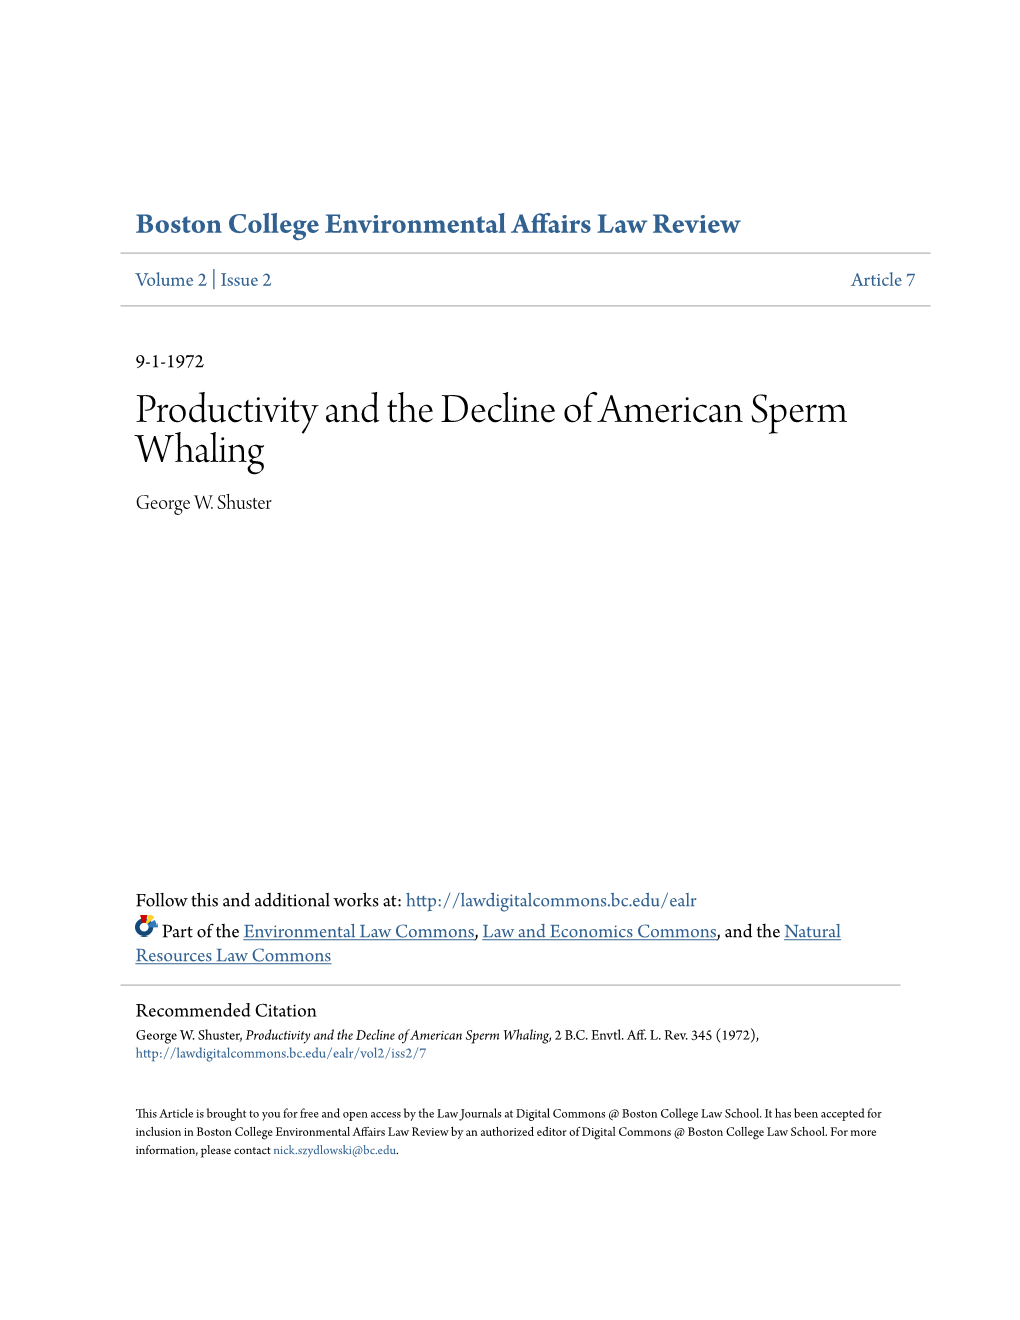 Productivity and the Decline of American Sperm Whaling George W